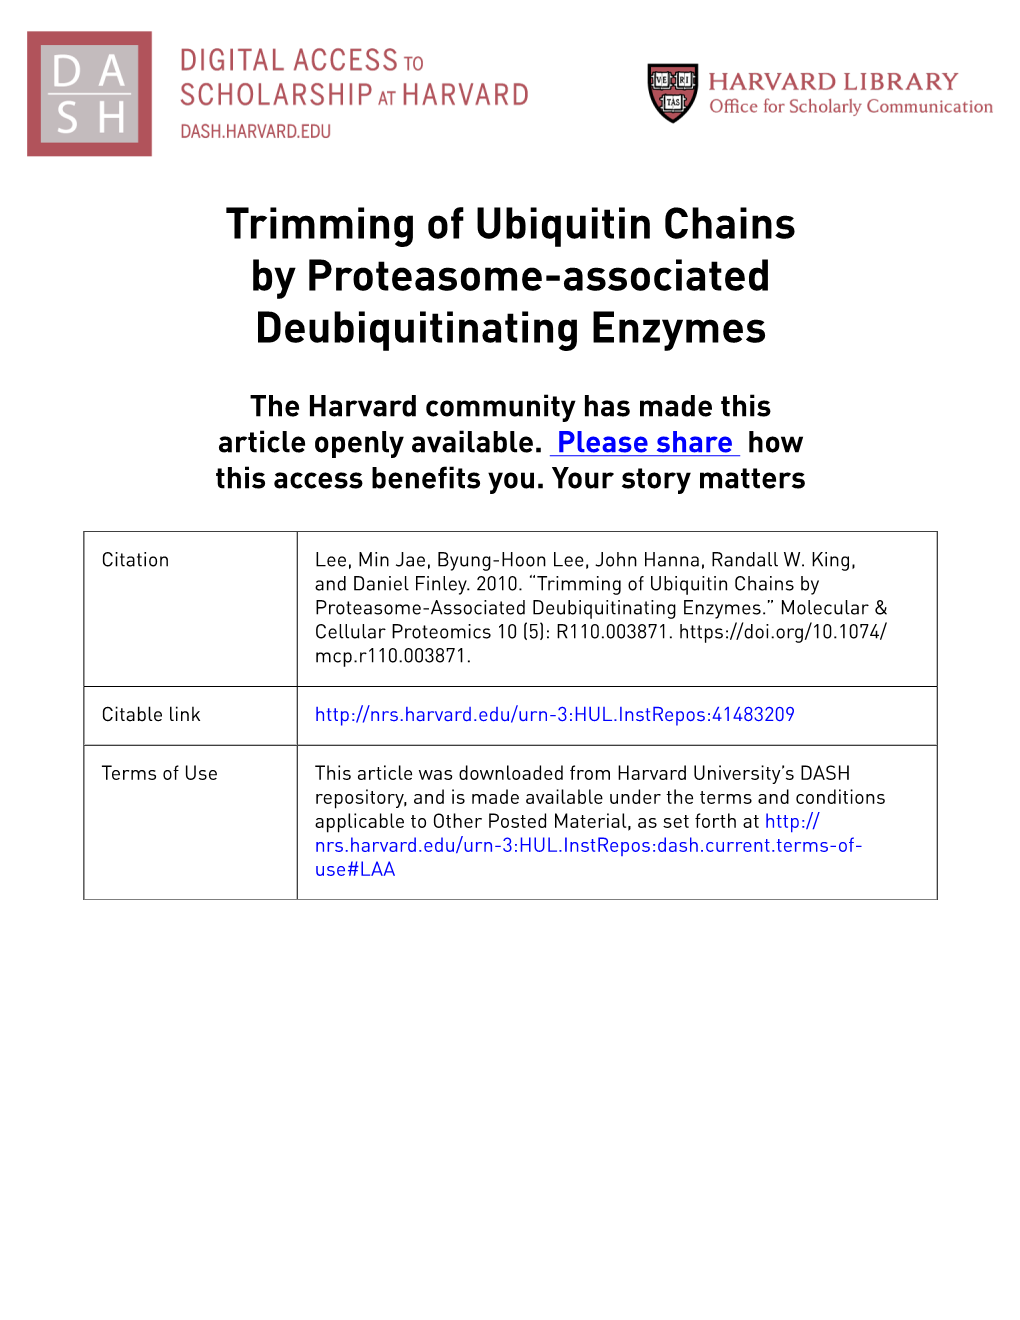 Trimming of Ubiquitin Chains by Proteasome-Associated Deubiquitinating Enzymes